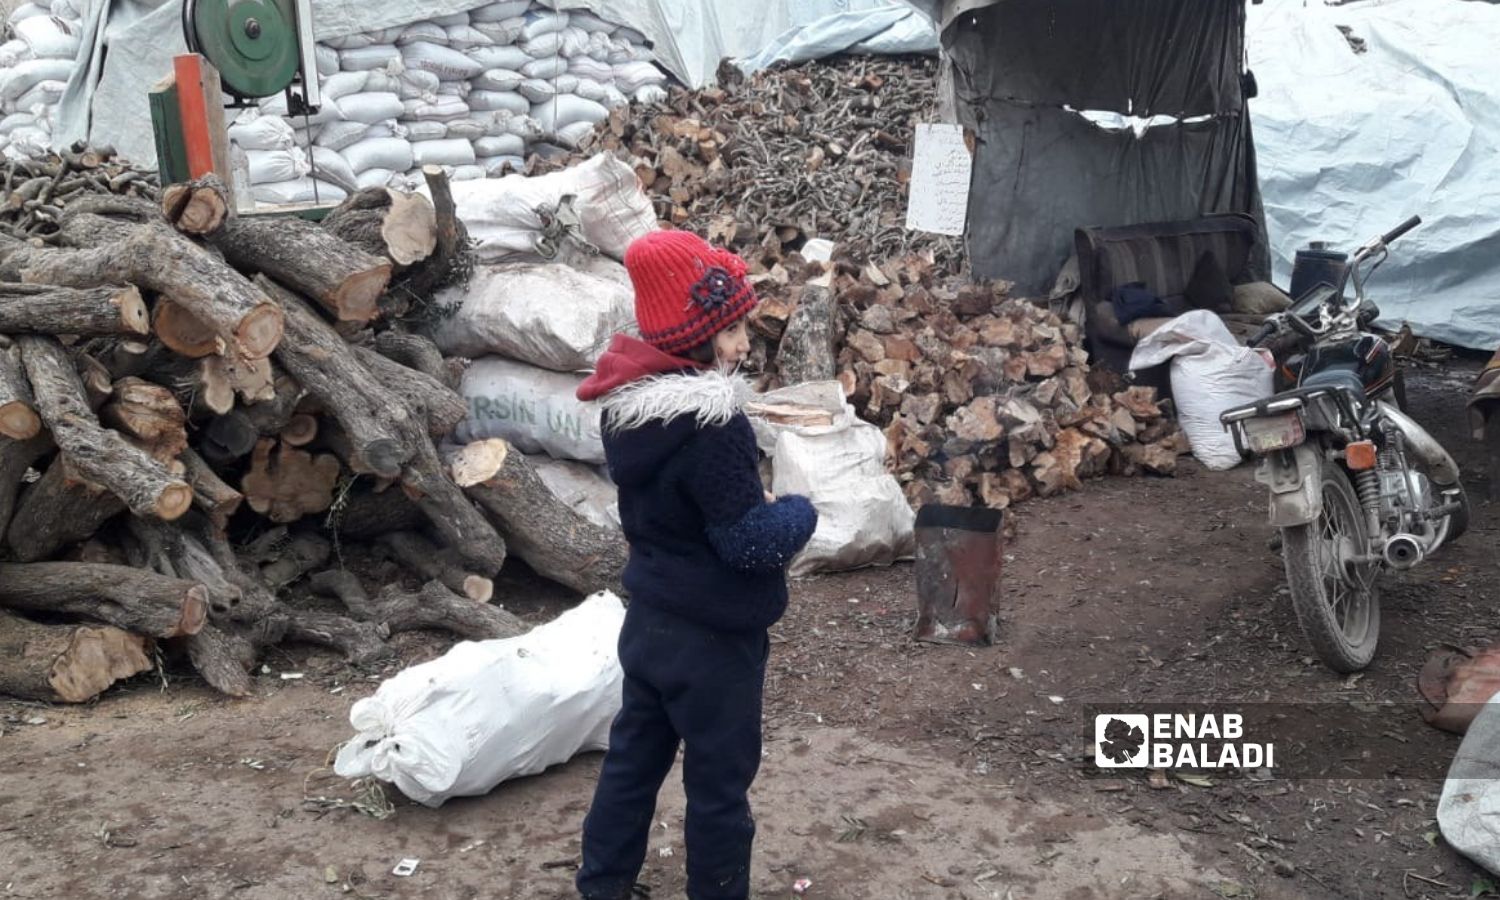 A girl collects firewood for heating in one of the IDP camps in northern Idlib region- 9 December 2022 (Enab Baladi/Anas al-Khouli)